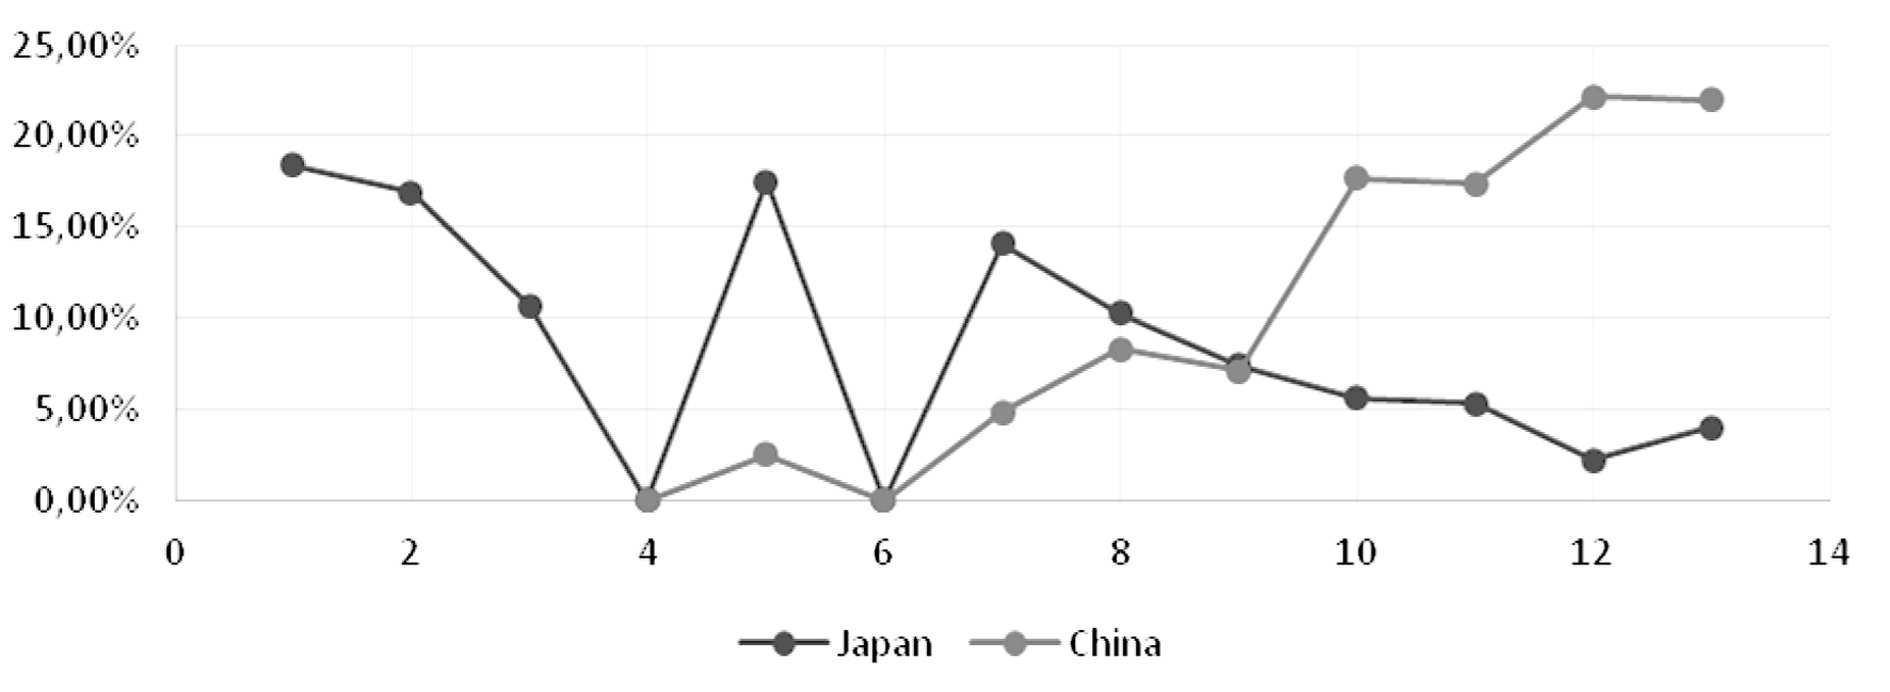 Figure 1. Kenya’s % of External Debt by Major Creditors (Japan and China). Data from: [22].